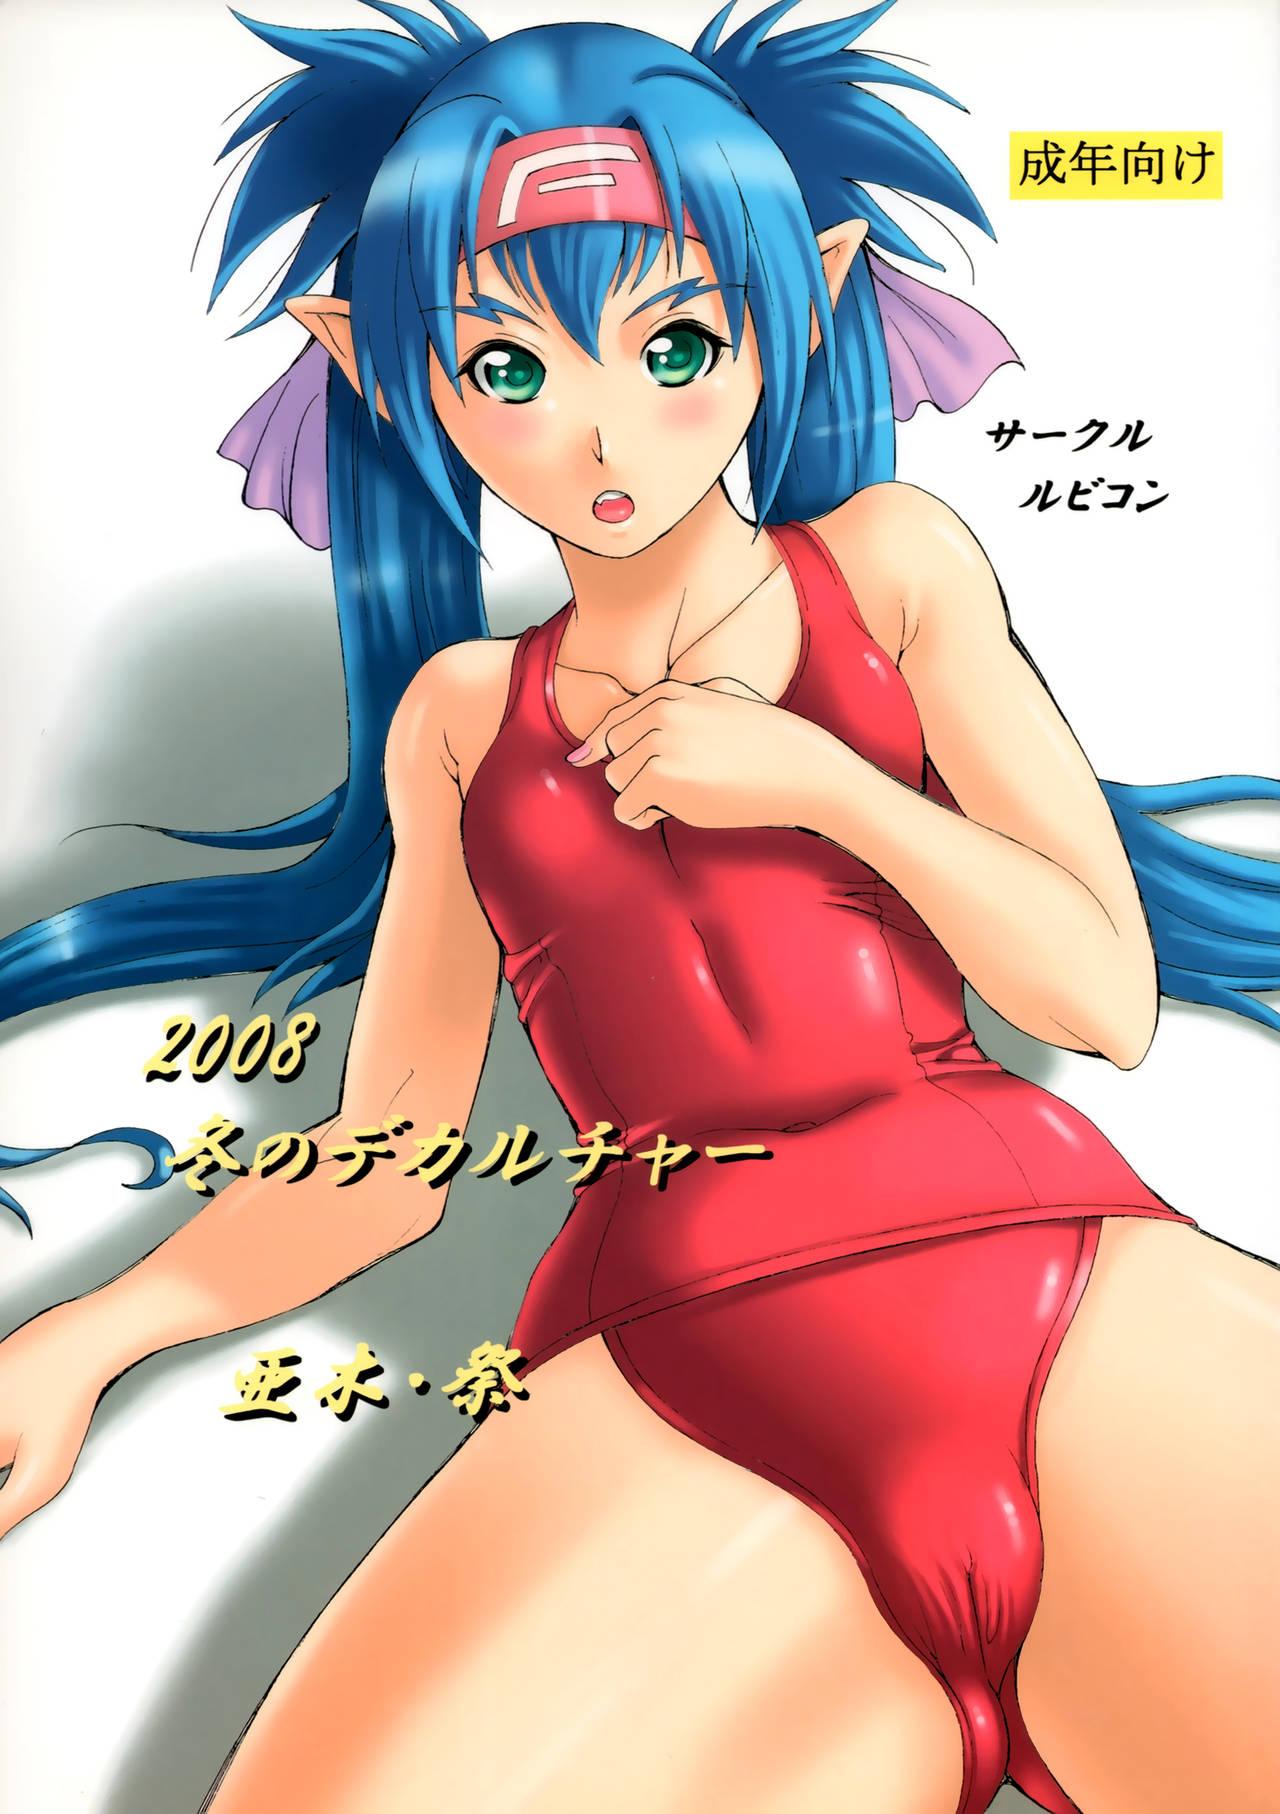 Tgirls 2008 Fuyu no Deculture - Macross frontier Cums - Picture 1